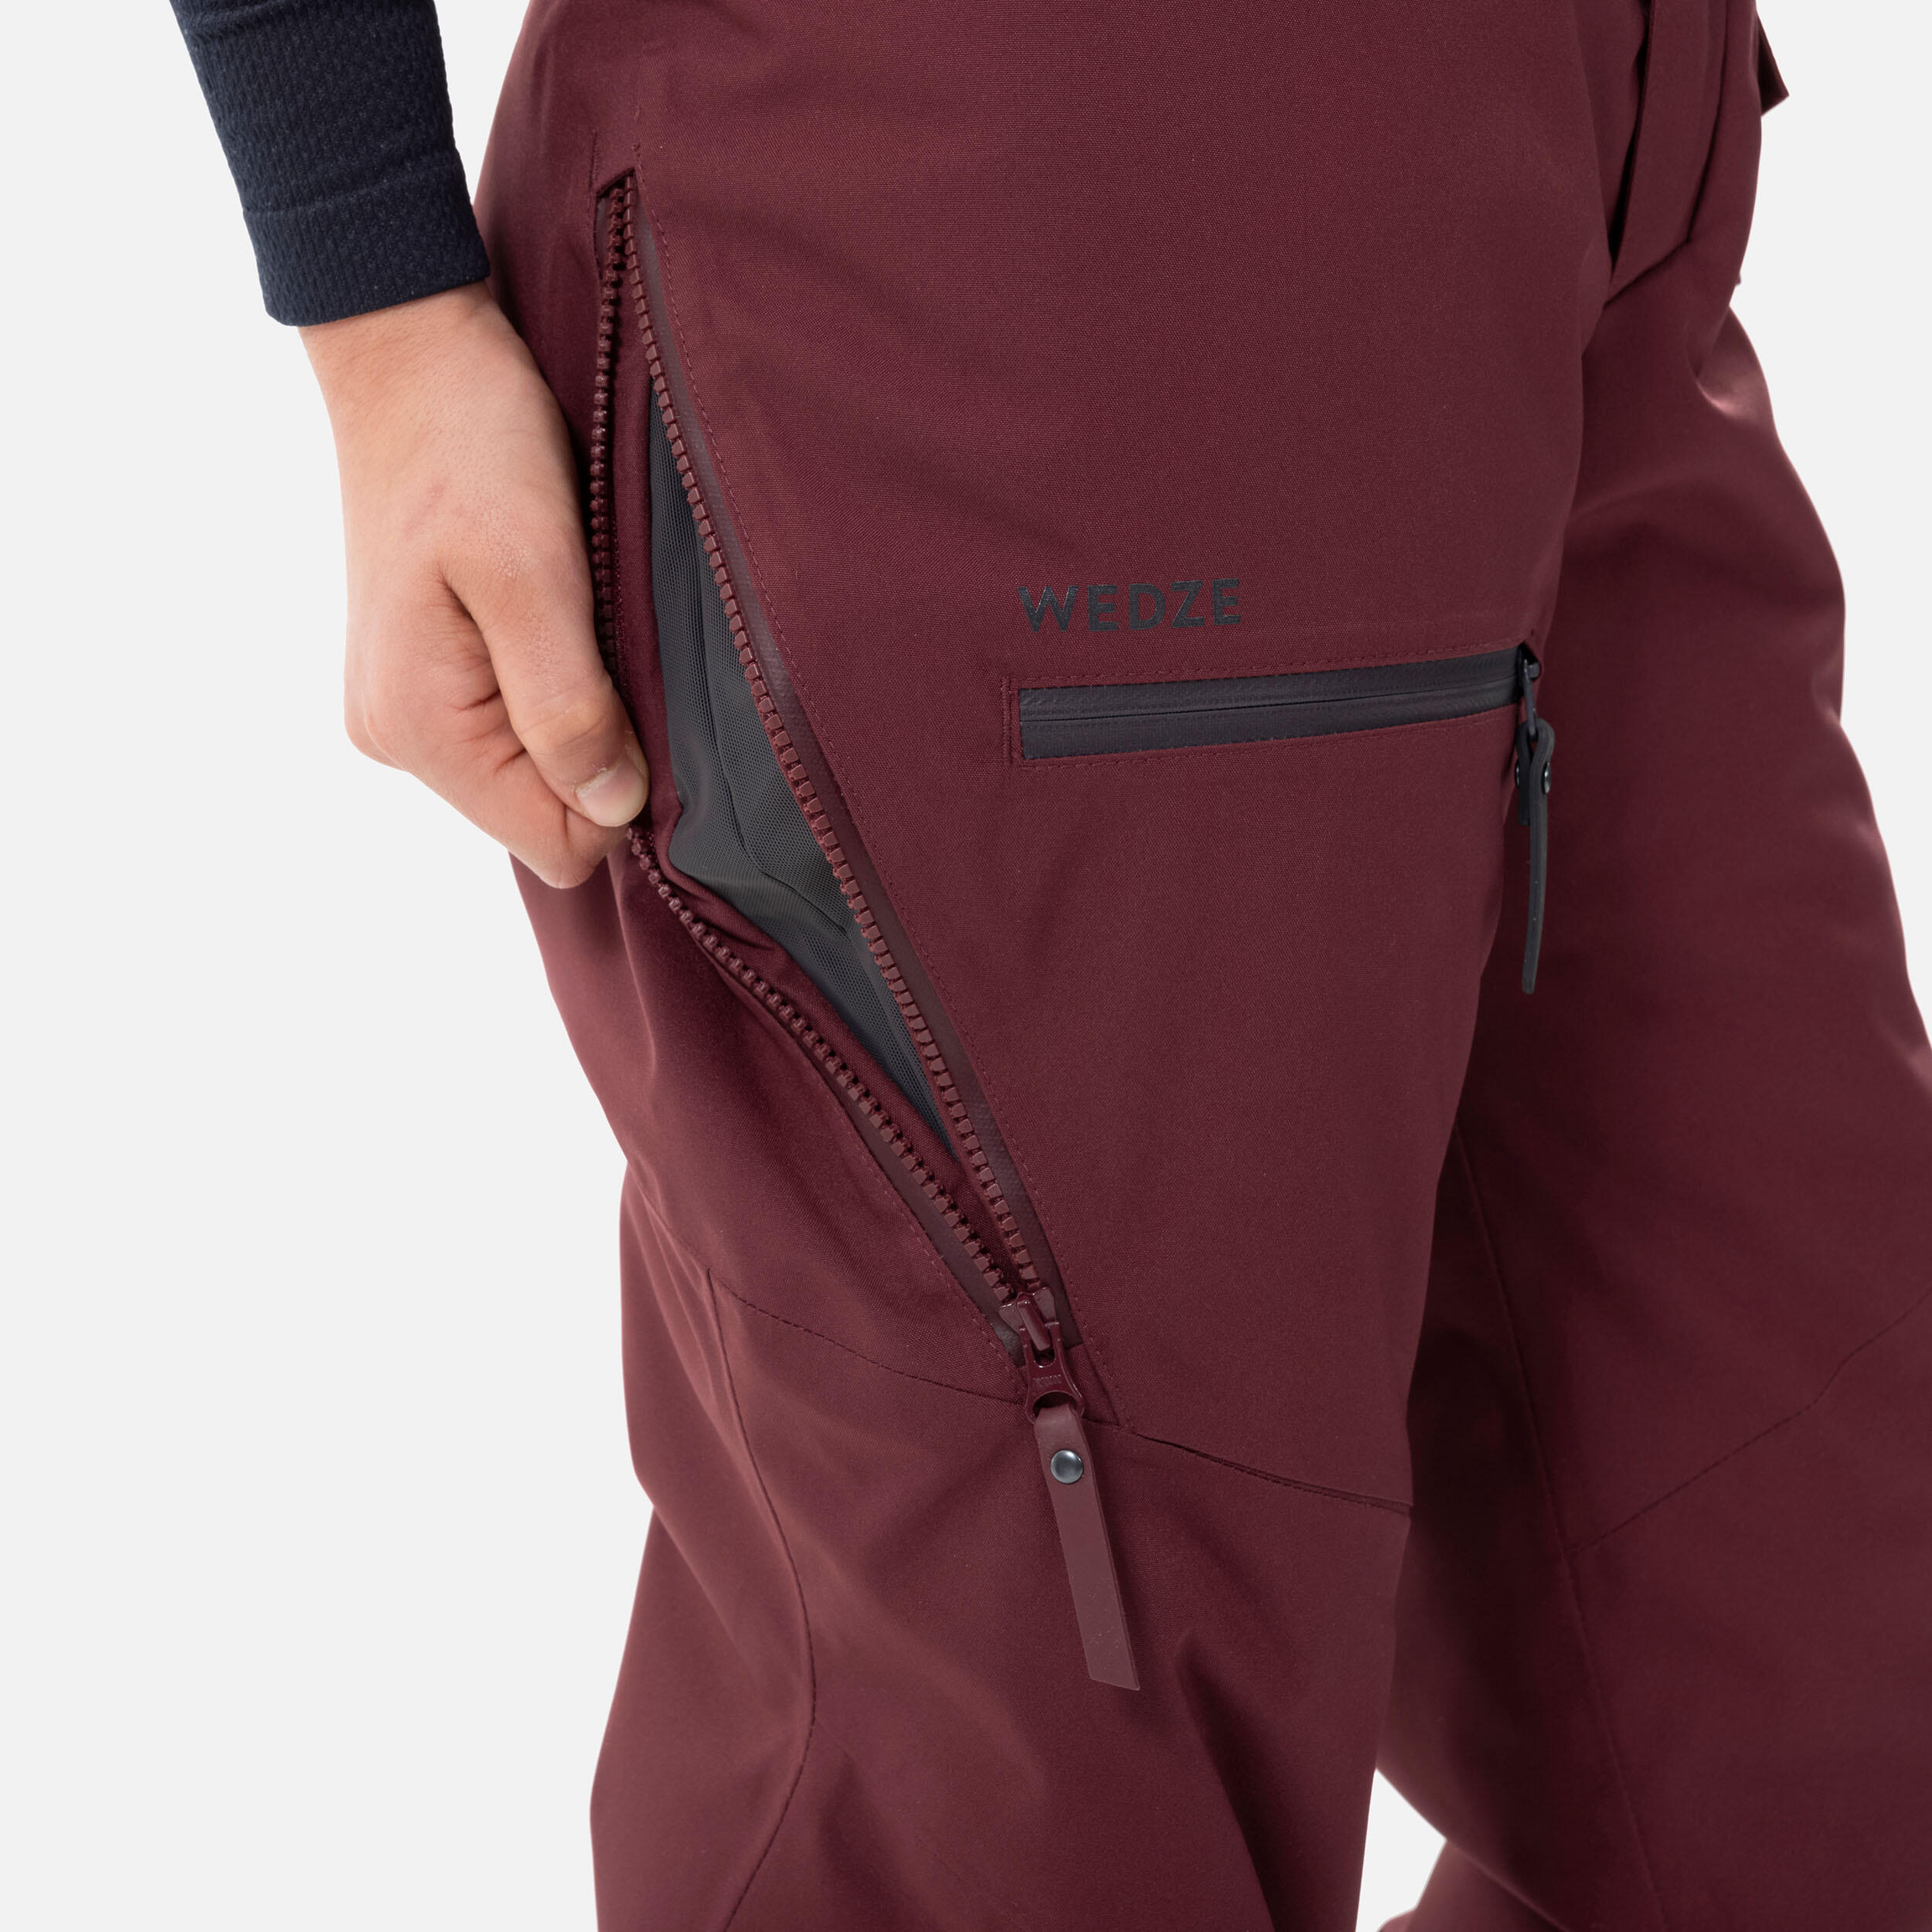 KIDS’ SKI TROUSERS WITH BACK PROTECTOR - FR900 - BURGUNDY 4/11